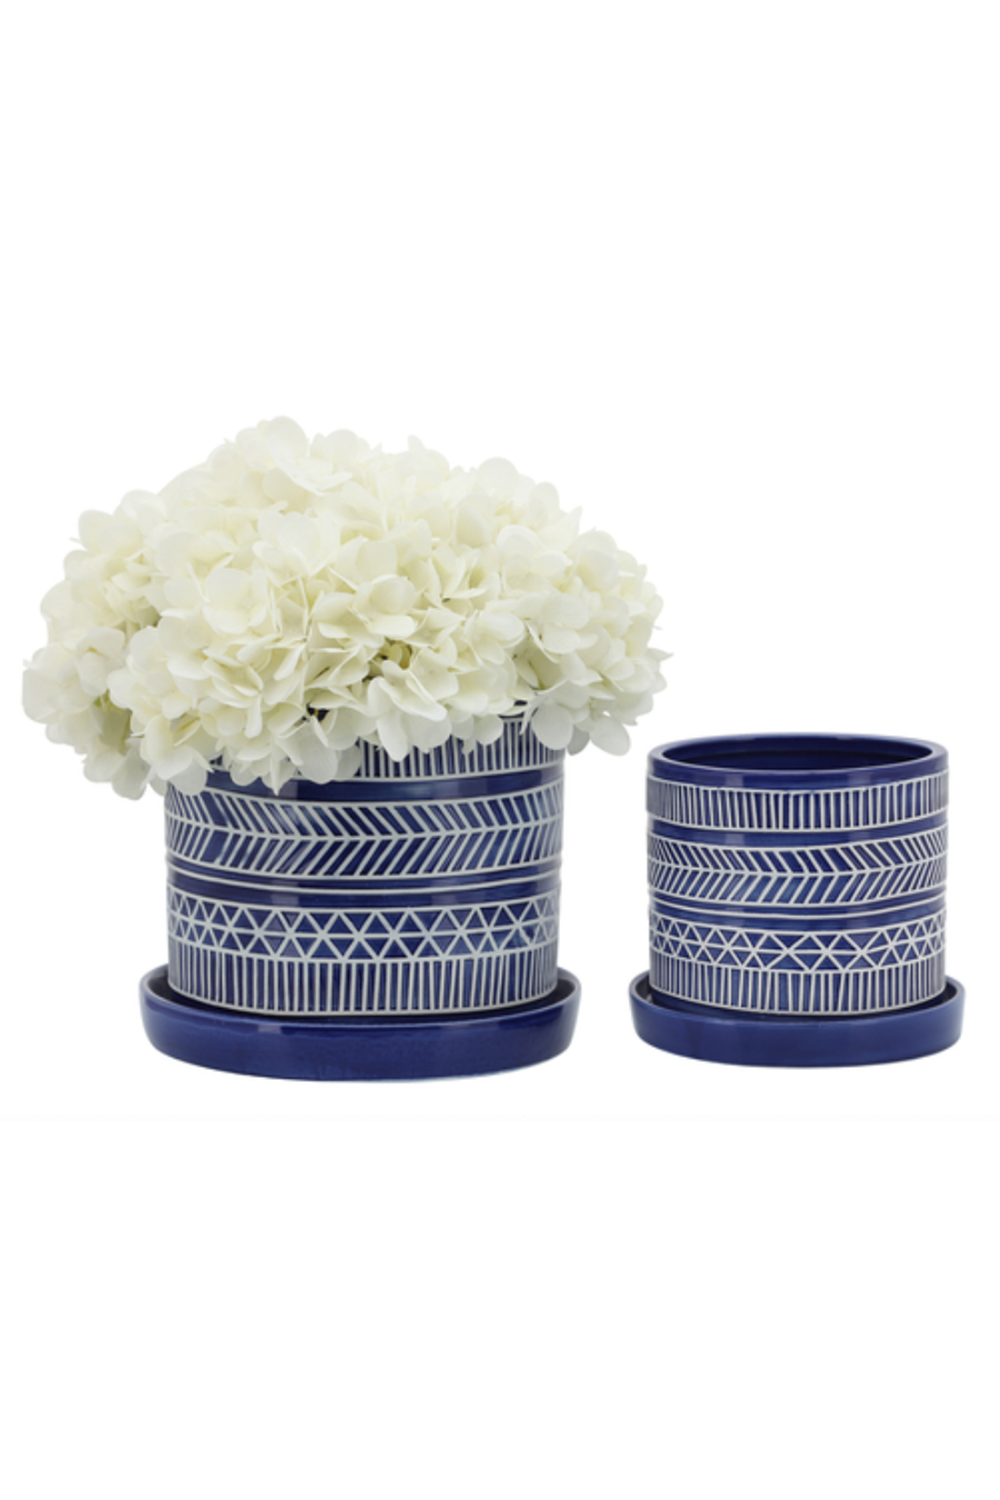 Tribal Planter with Saucer - Blue